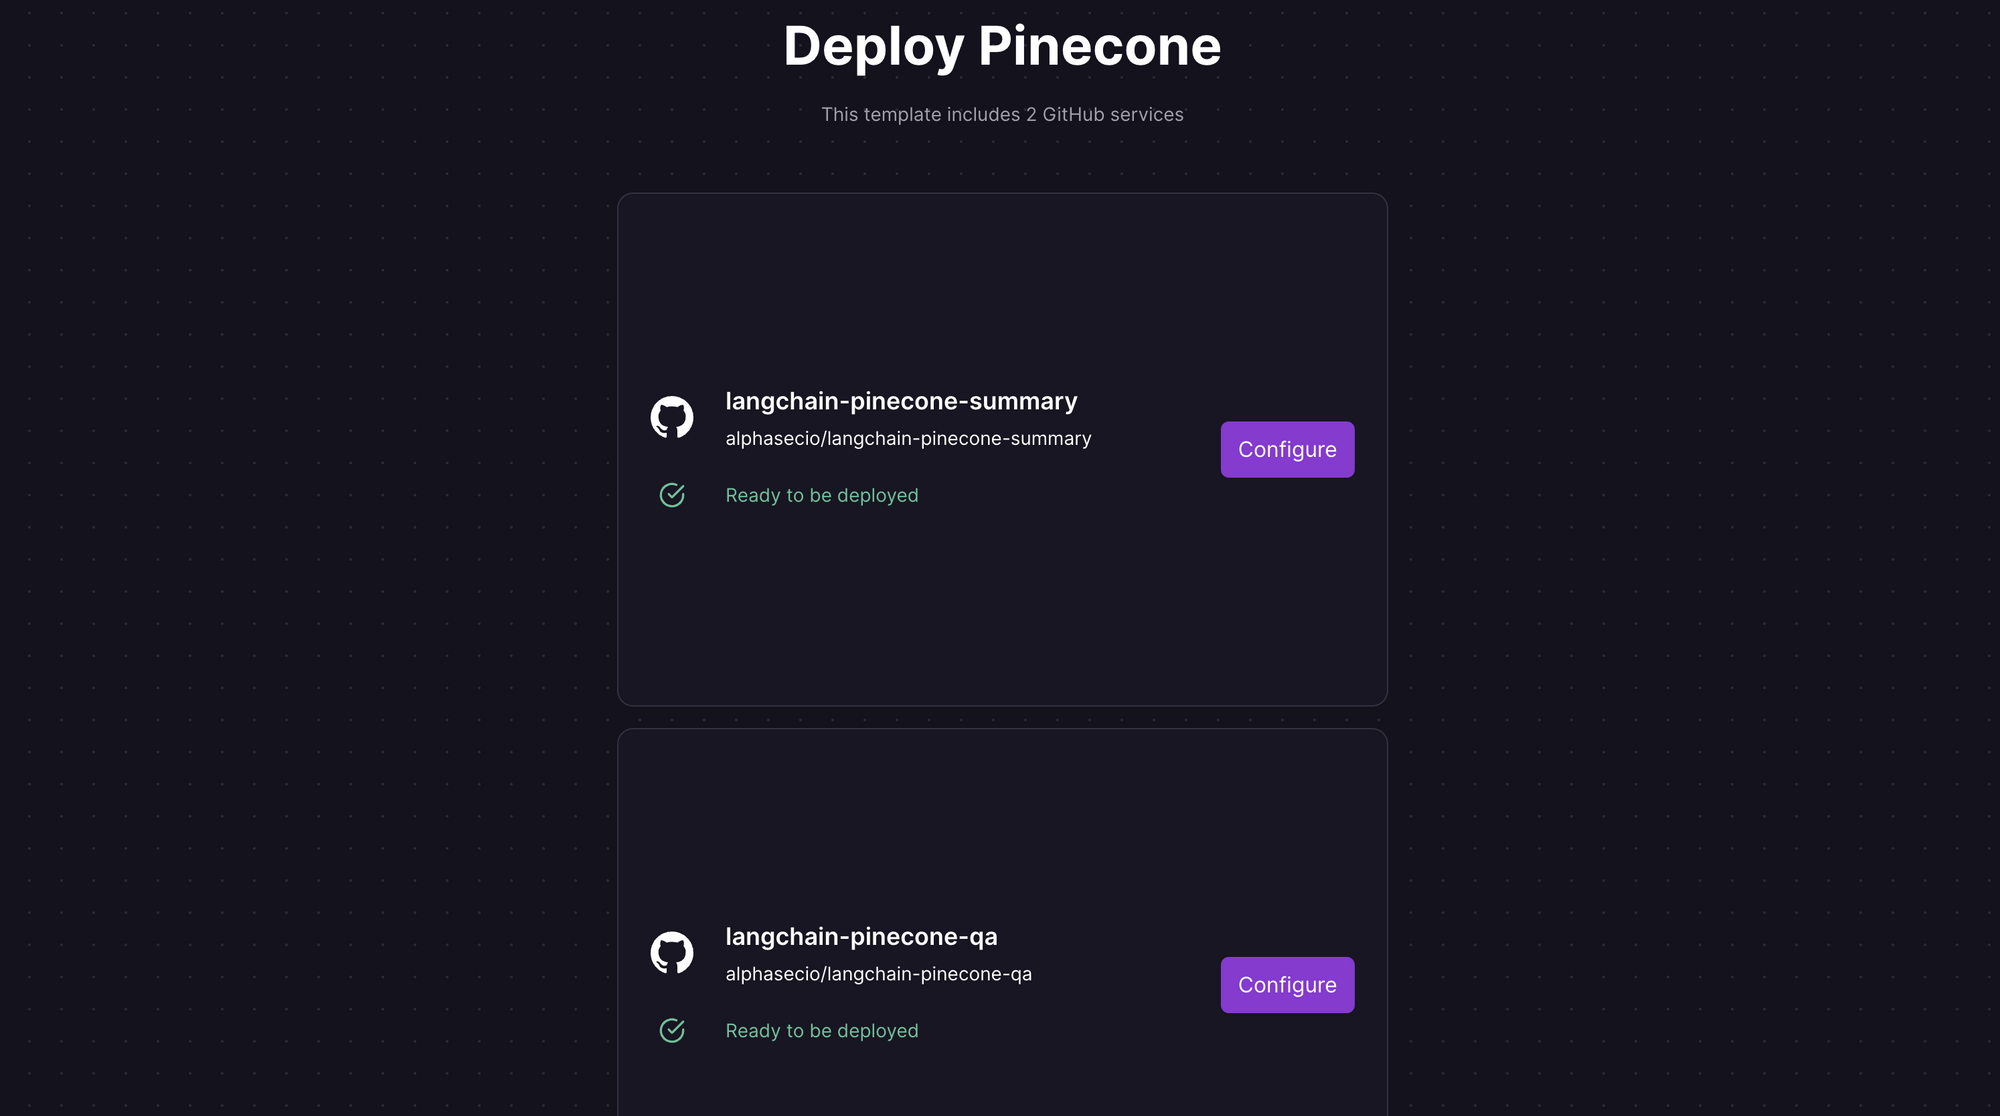 Deploy Pinecone apps using one-click template on Railway